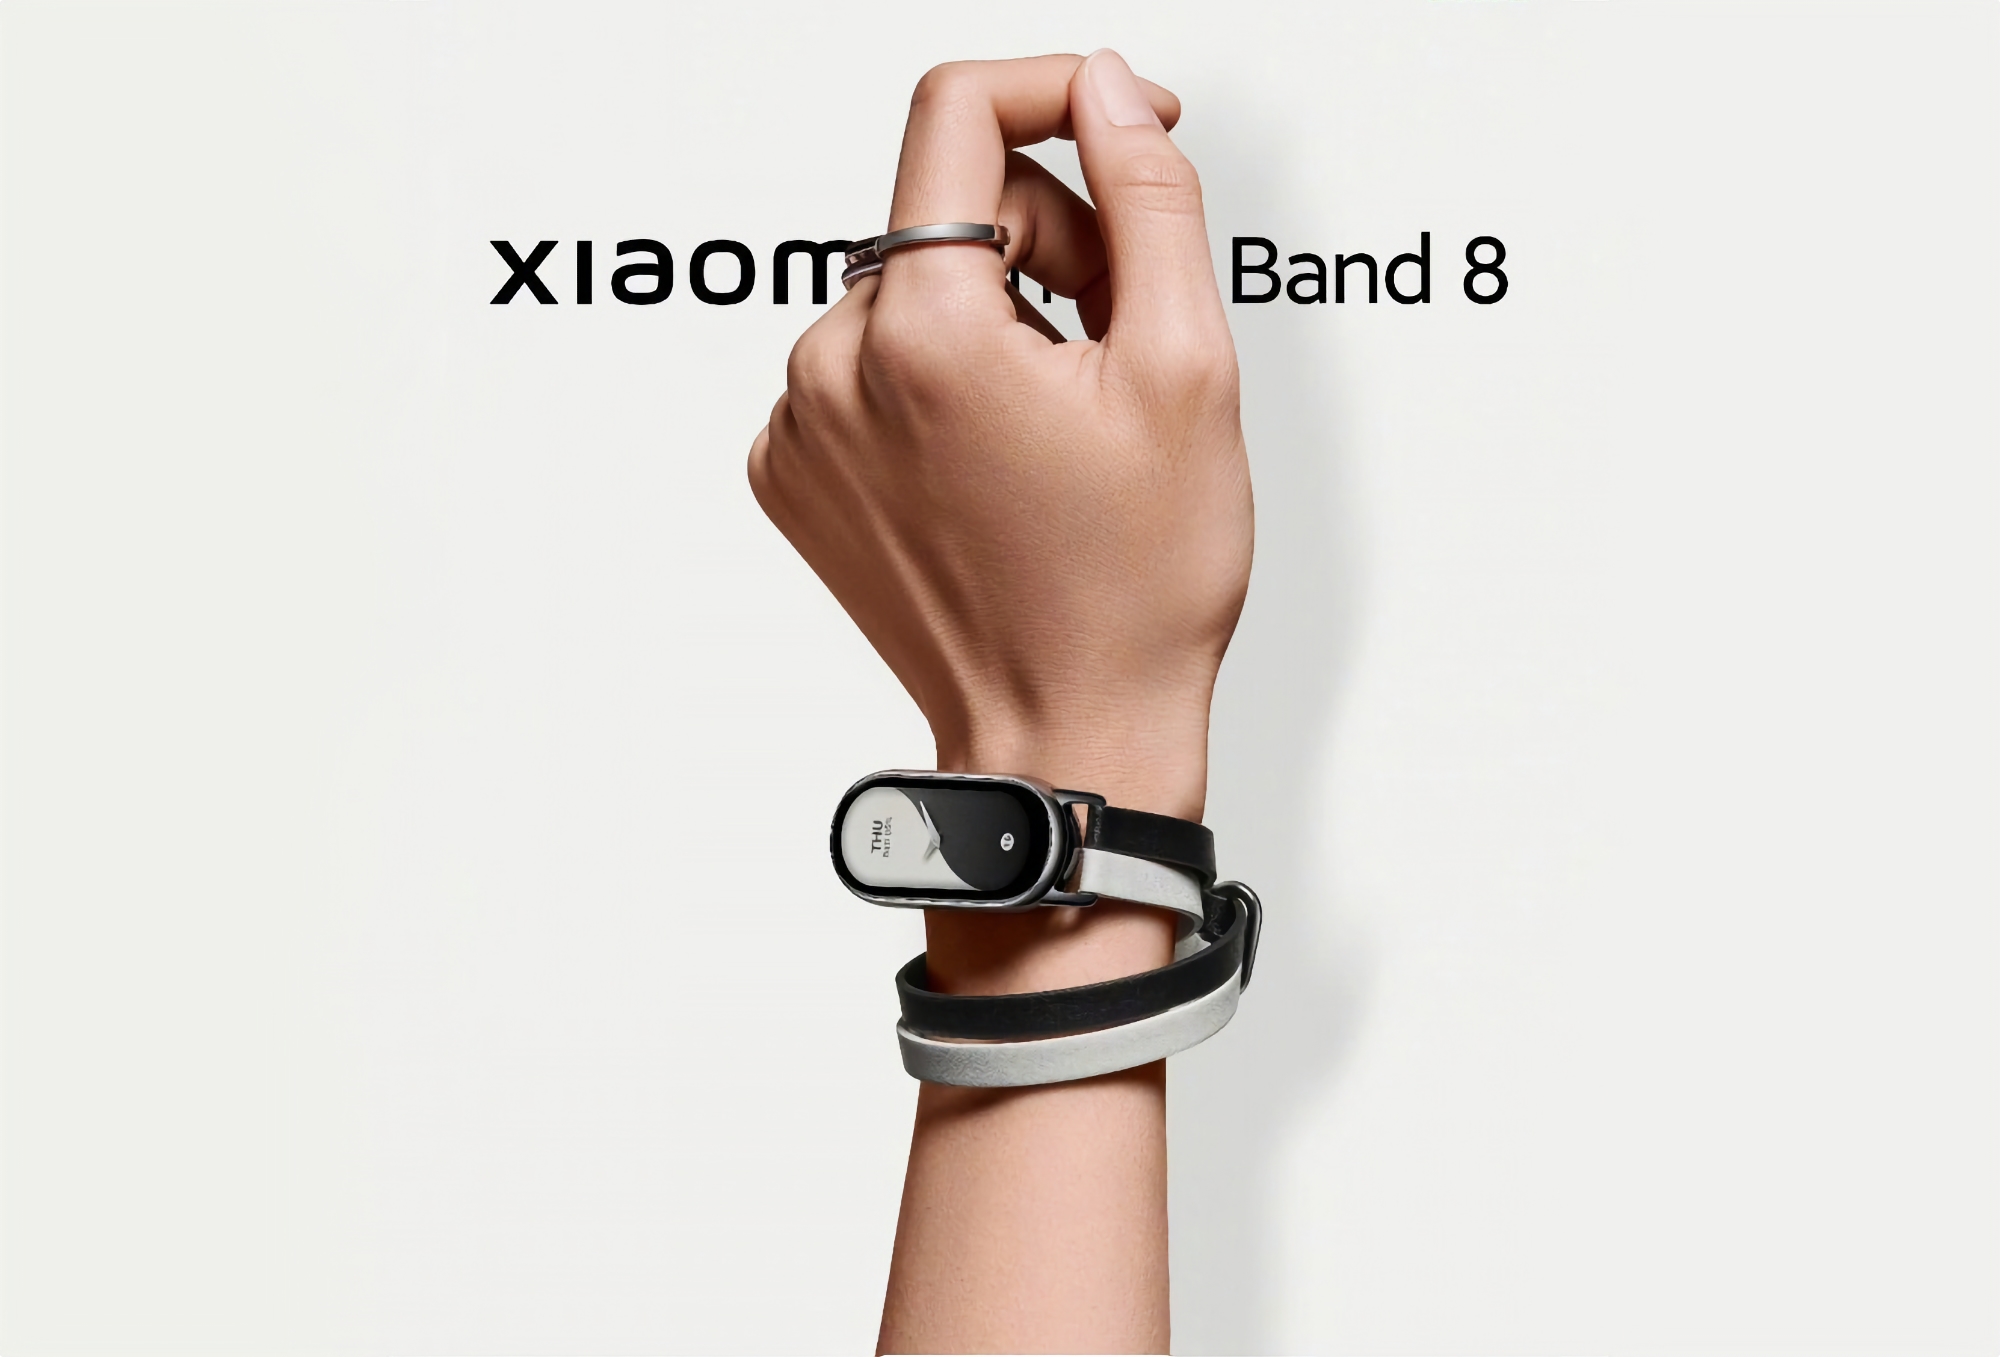 Not just on the arm: Xiaomi shows how the Xiaomi Smart Band 8 can be worn